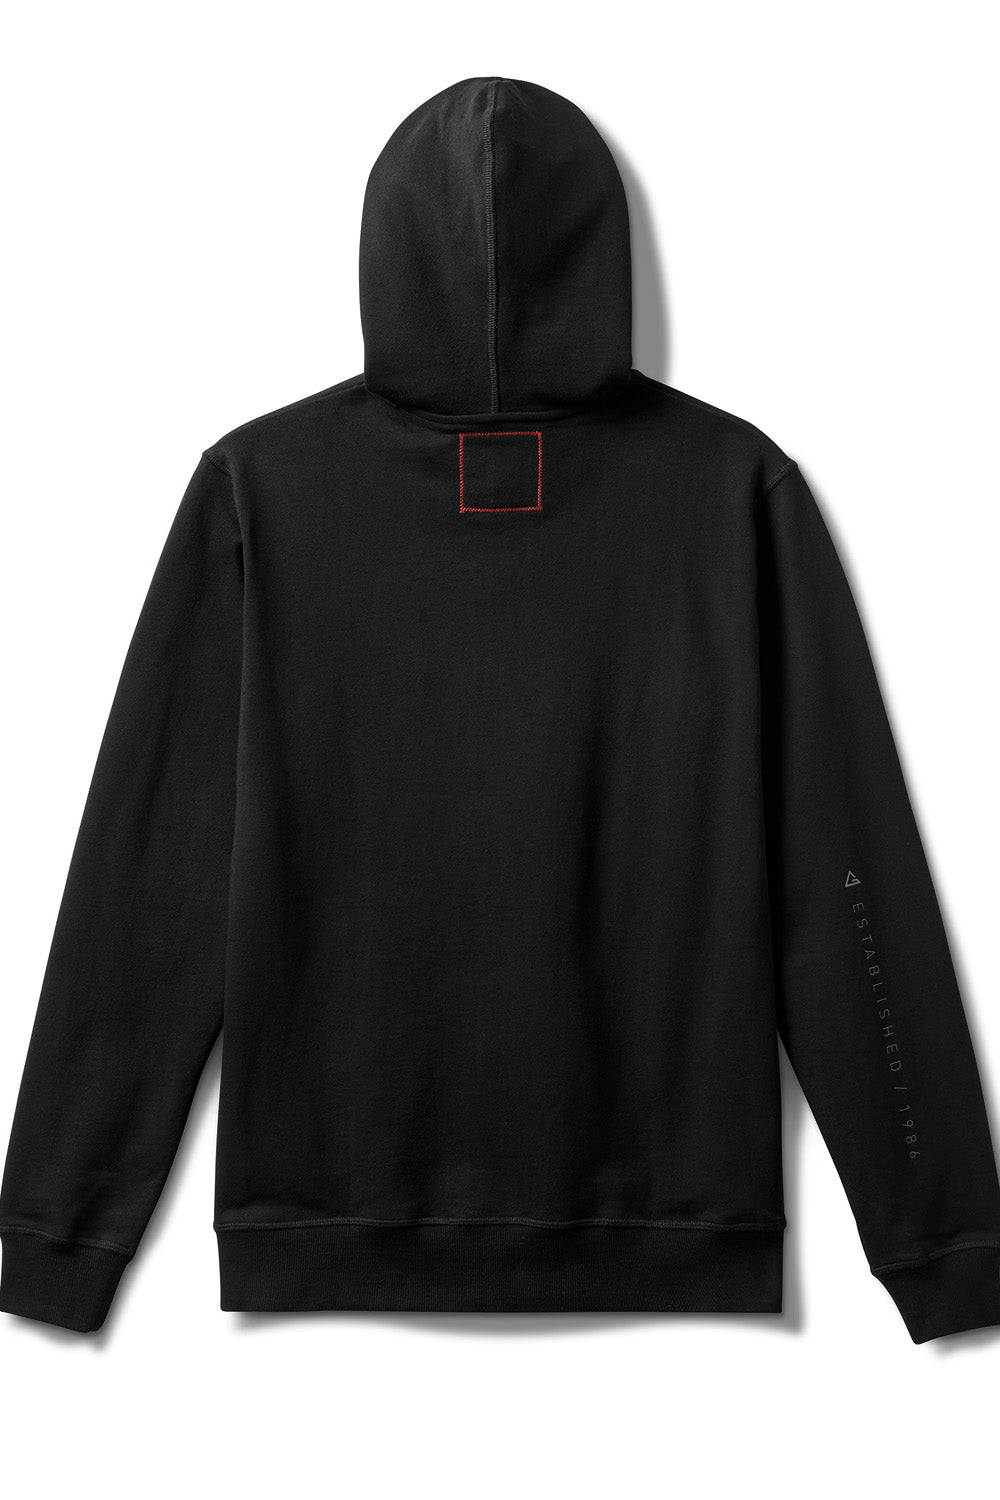 Incognito Boxed Hoodie - Black